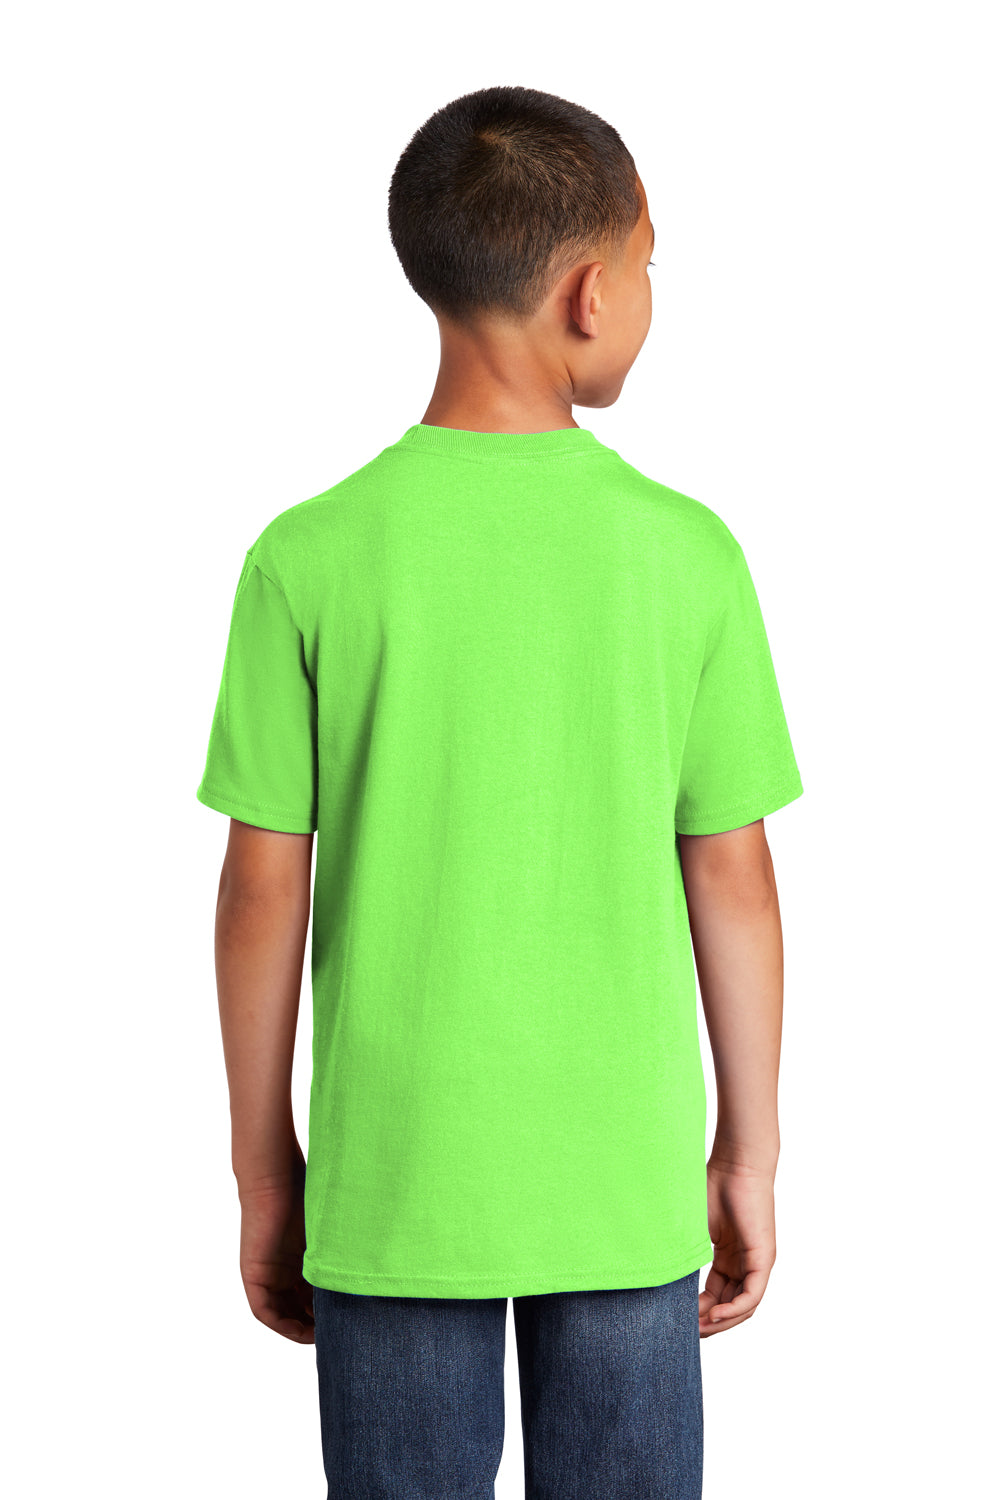 Port & Company PC54Y Youth Core Short Sleeve Crewneck T-Shirt Neon Green Back